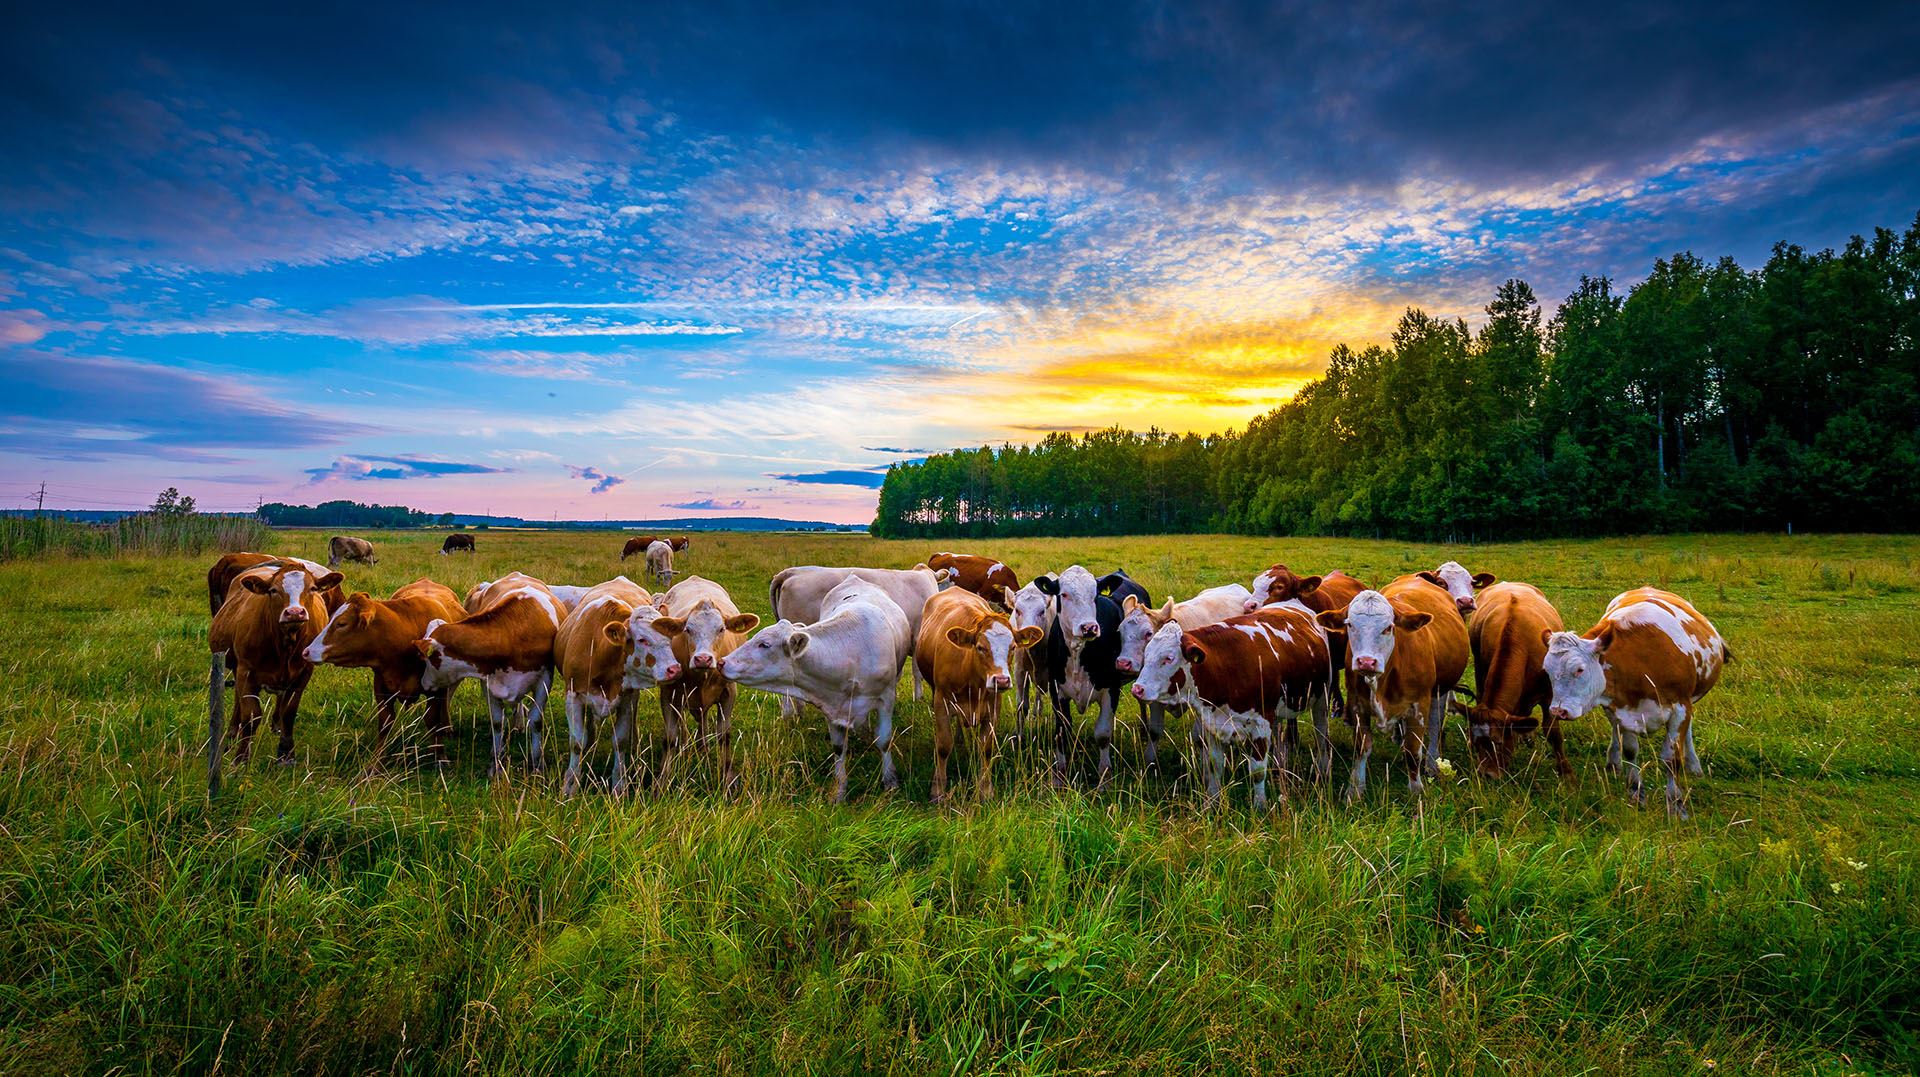 Cattle in green field during sunset